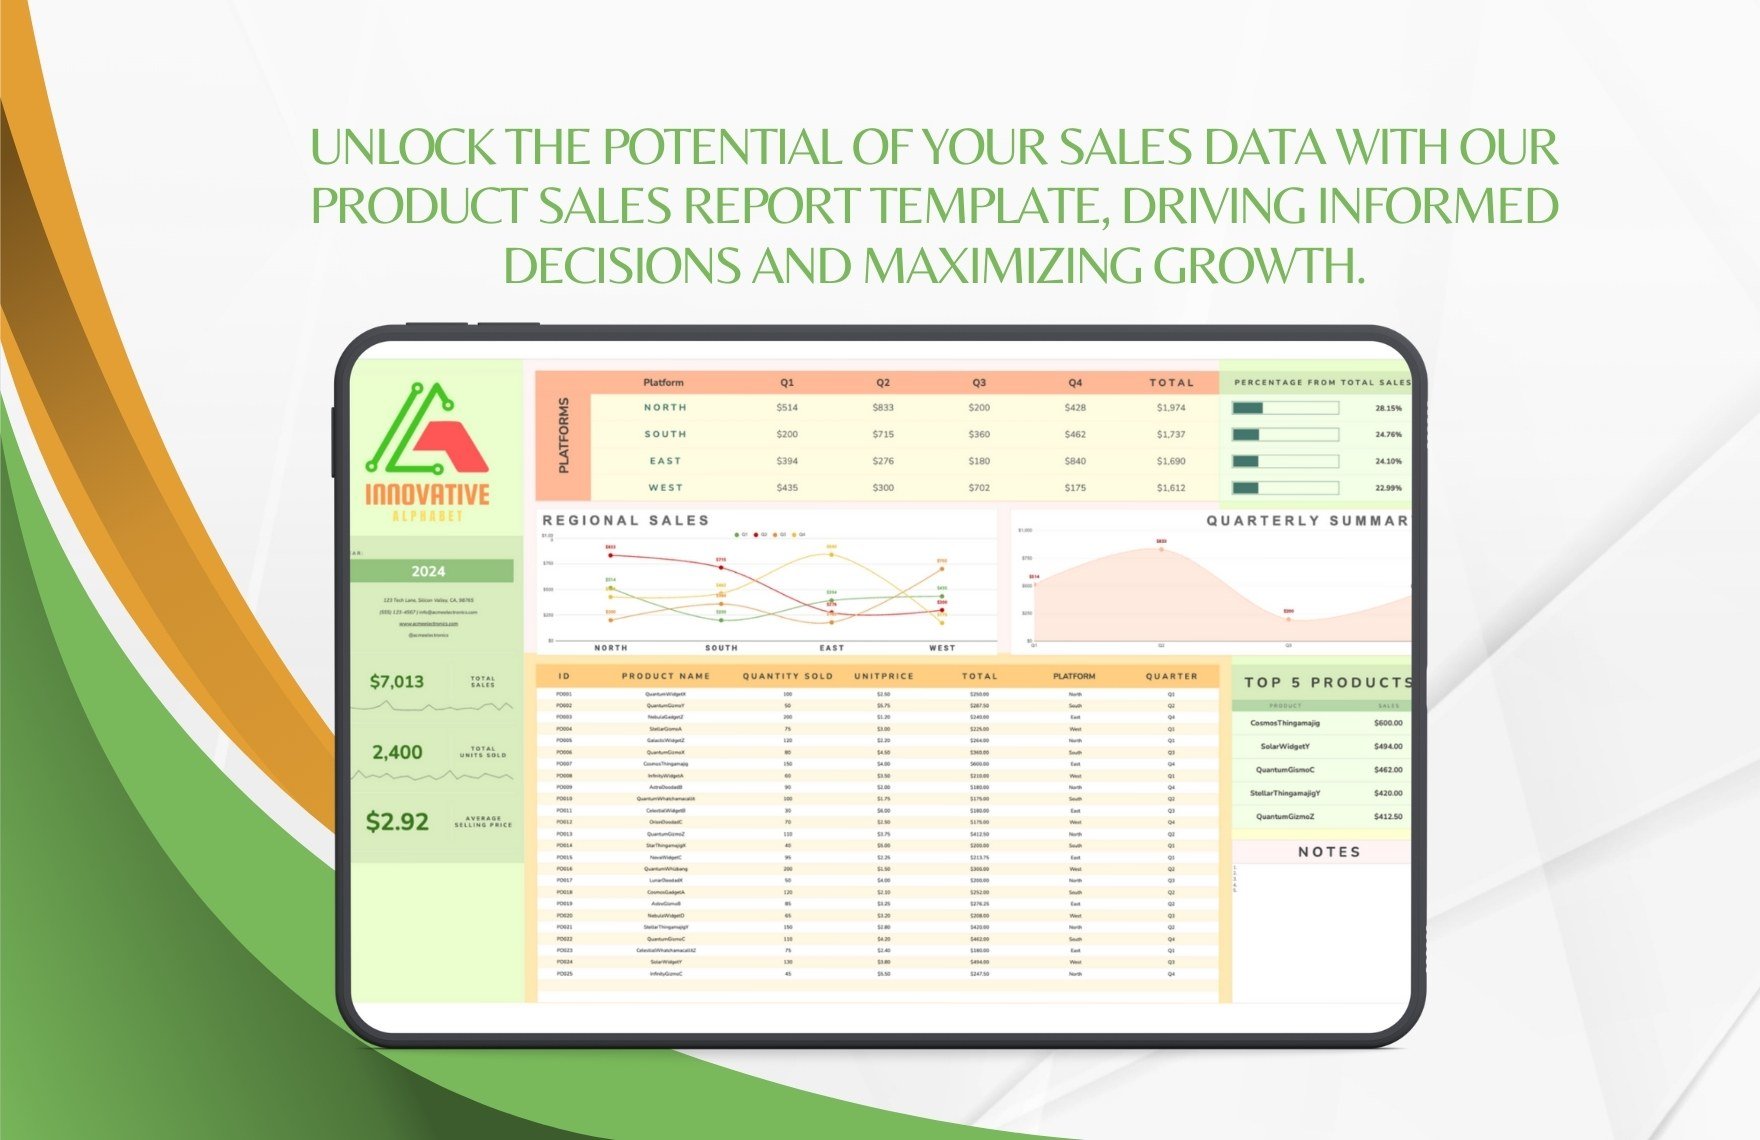 Product Sales Report Template